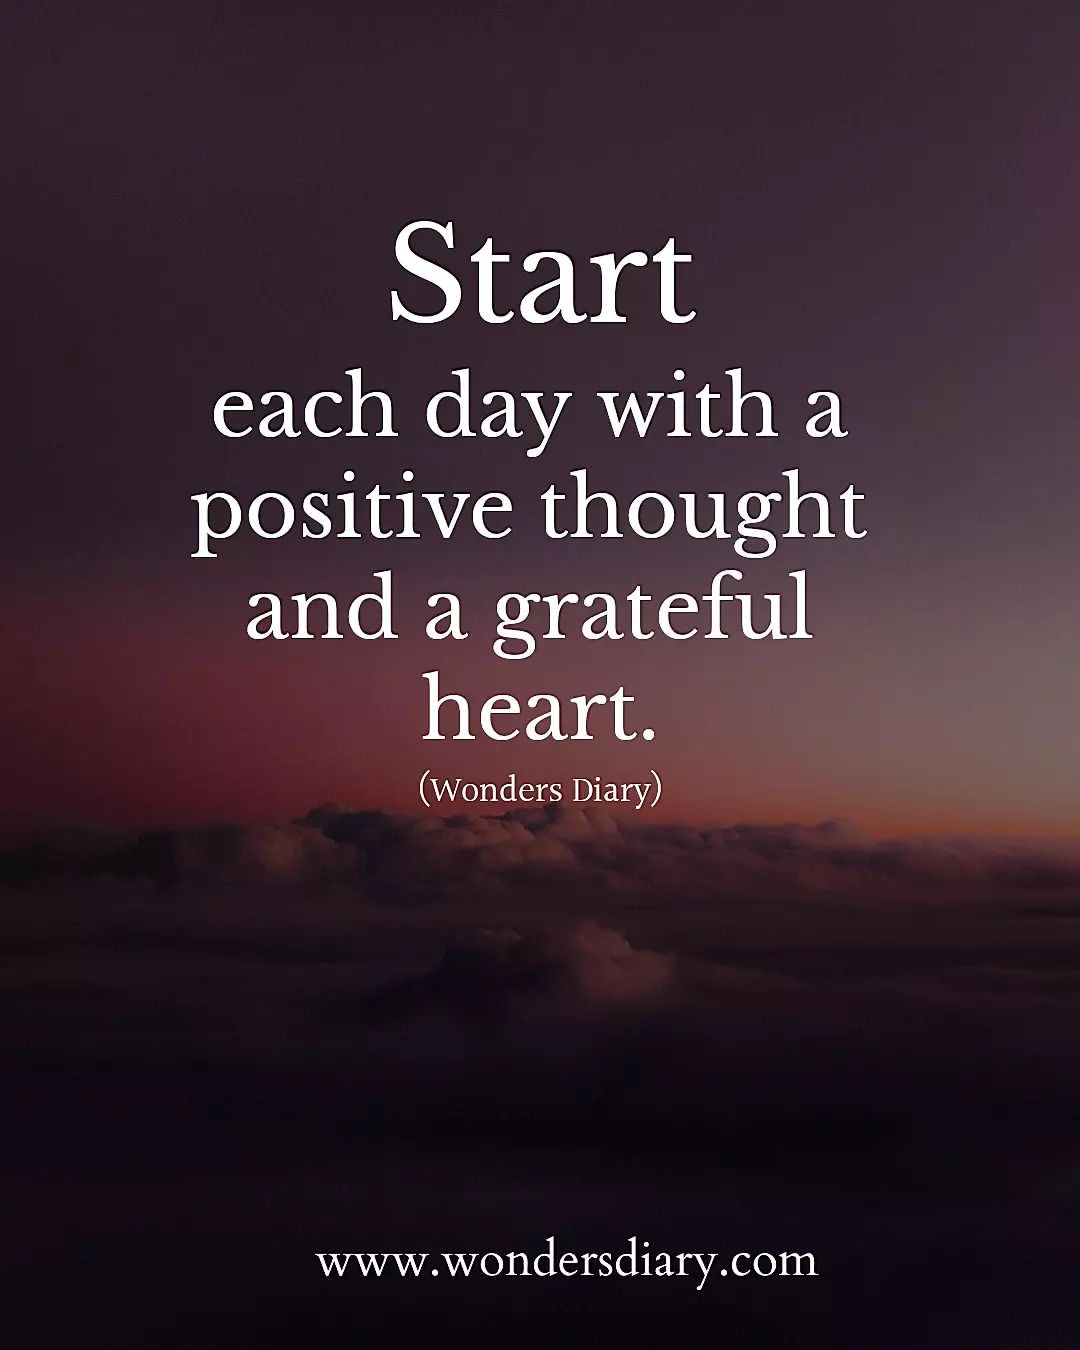 Start each day with a positive thought and a grateful heart.